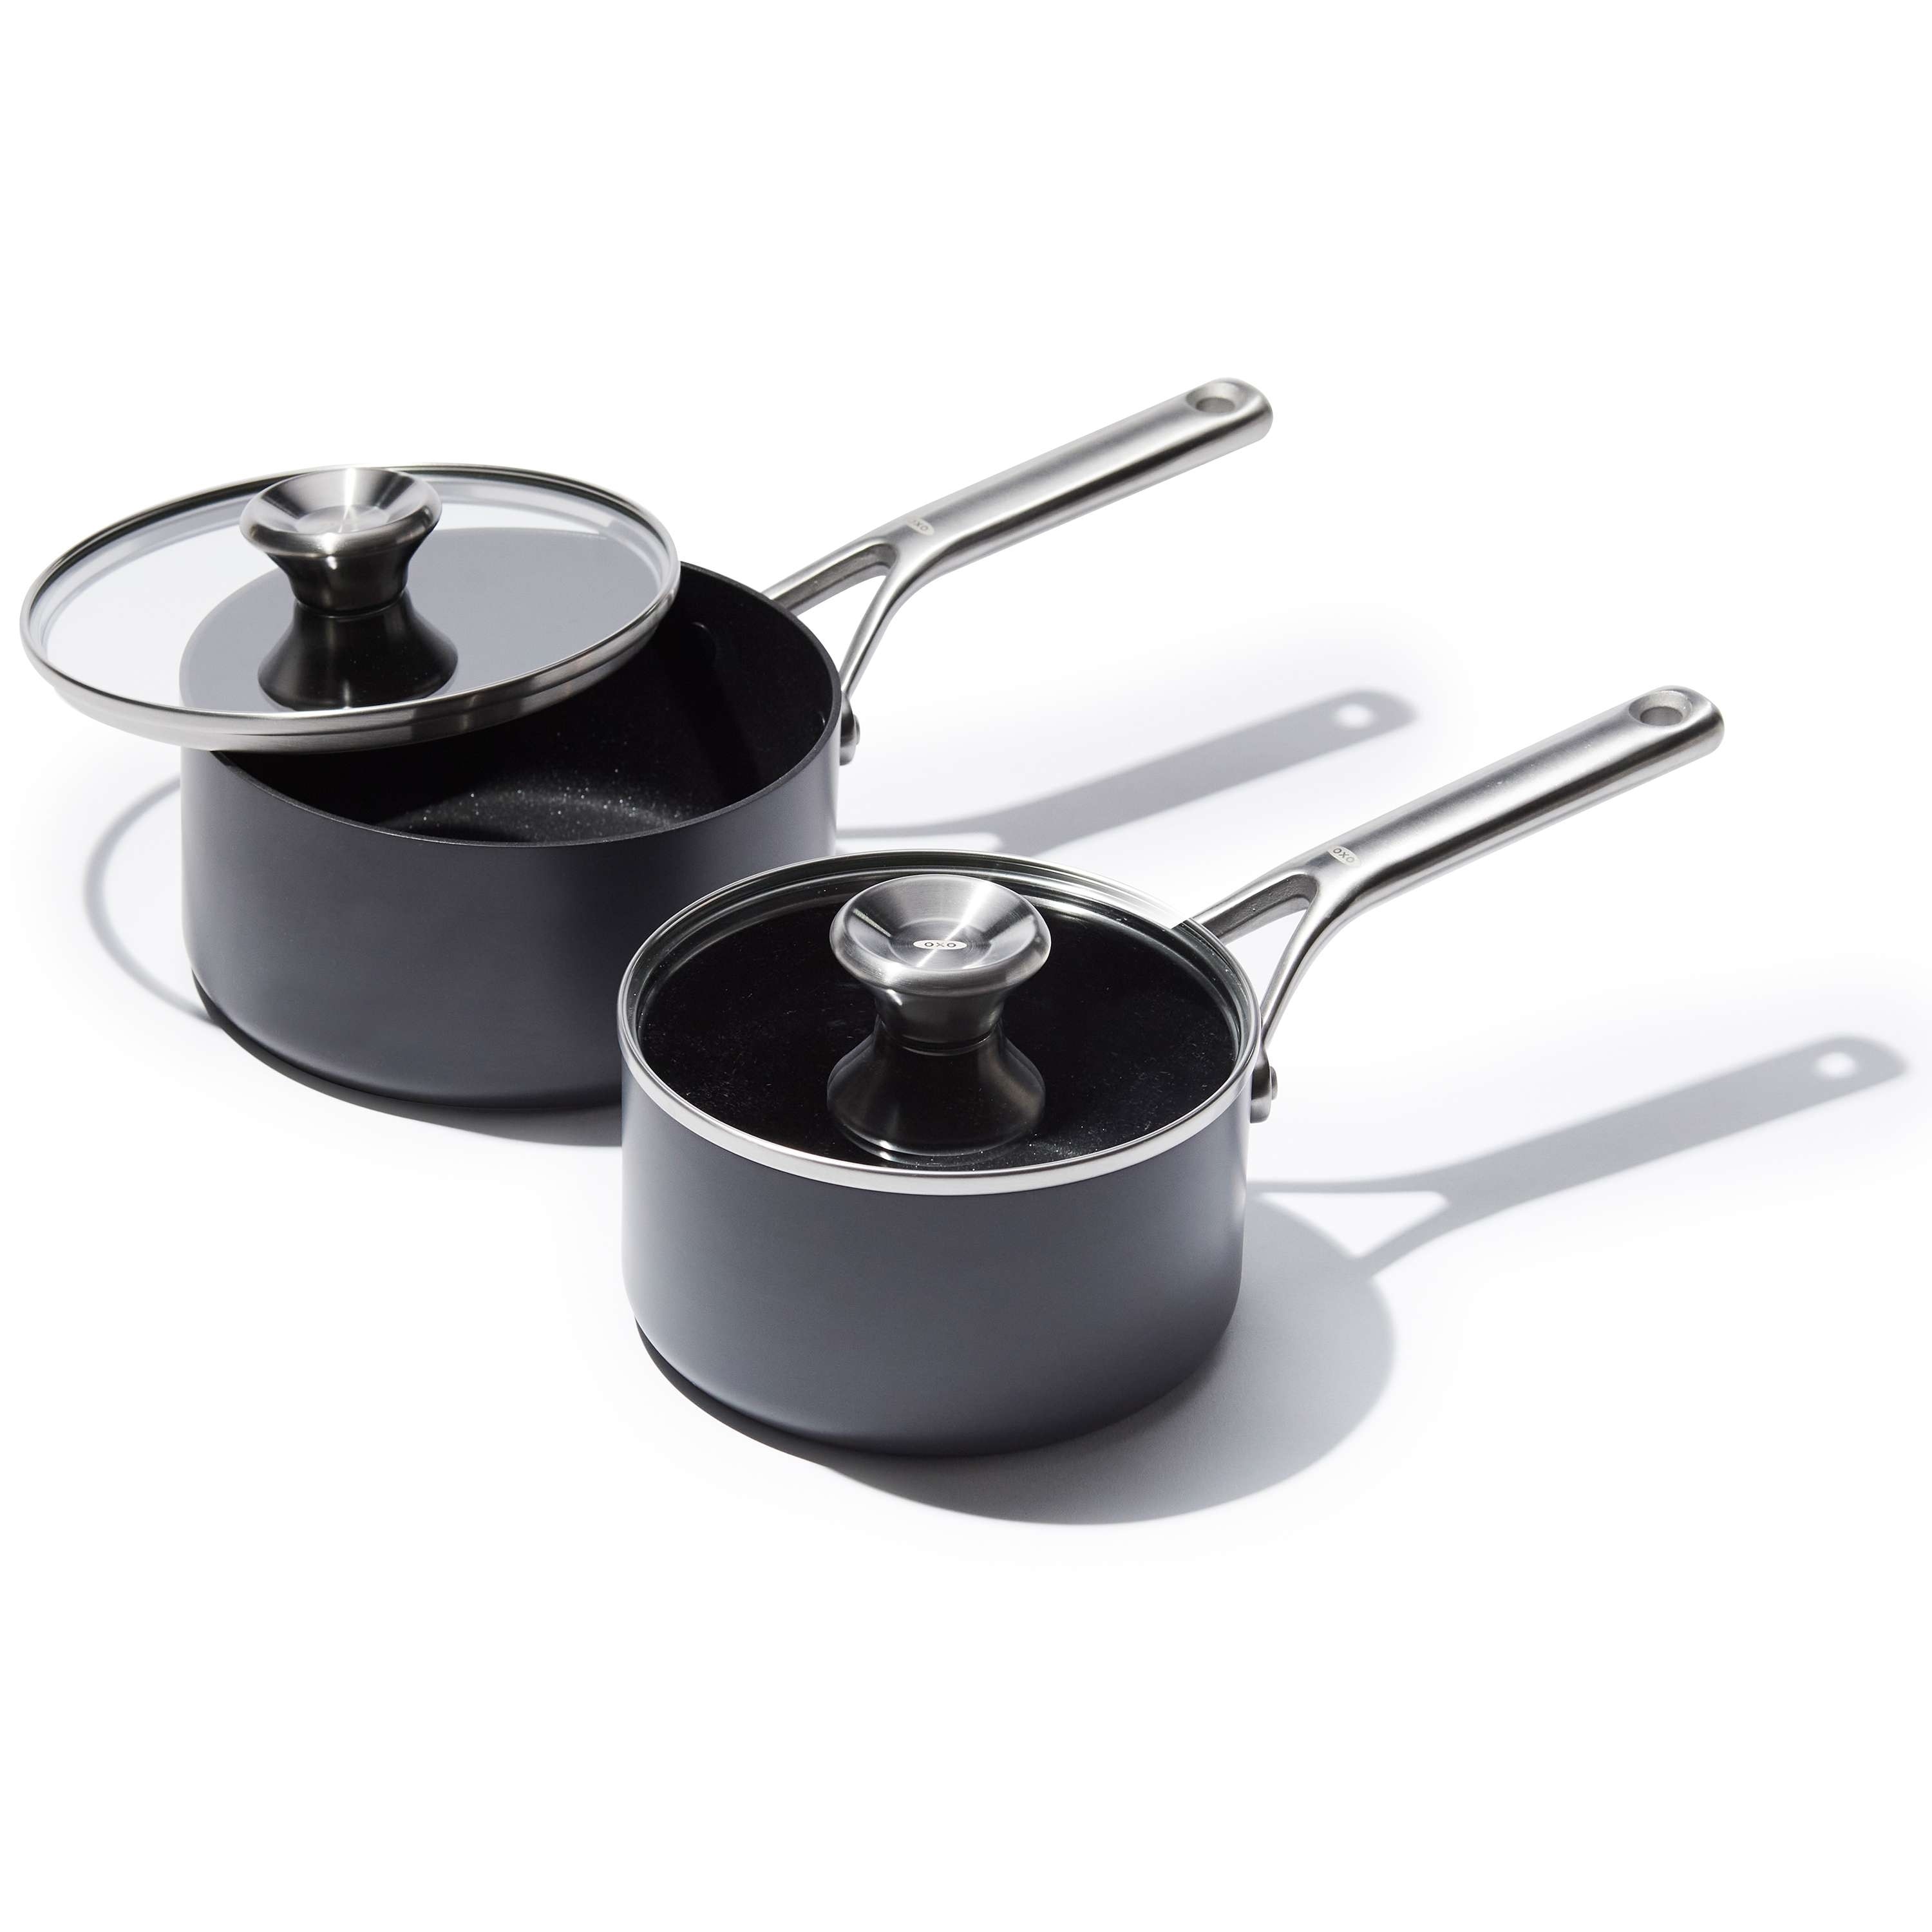 https://ak1.ostkcdn.com/images/products/is/images/direct/8346aed1772068477bb5232098c442f0051672aa/OXO-Professional-Ceramic-Non-Stick-4-Piece-Saucepan-Set.jpg